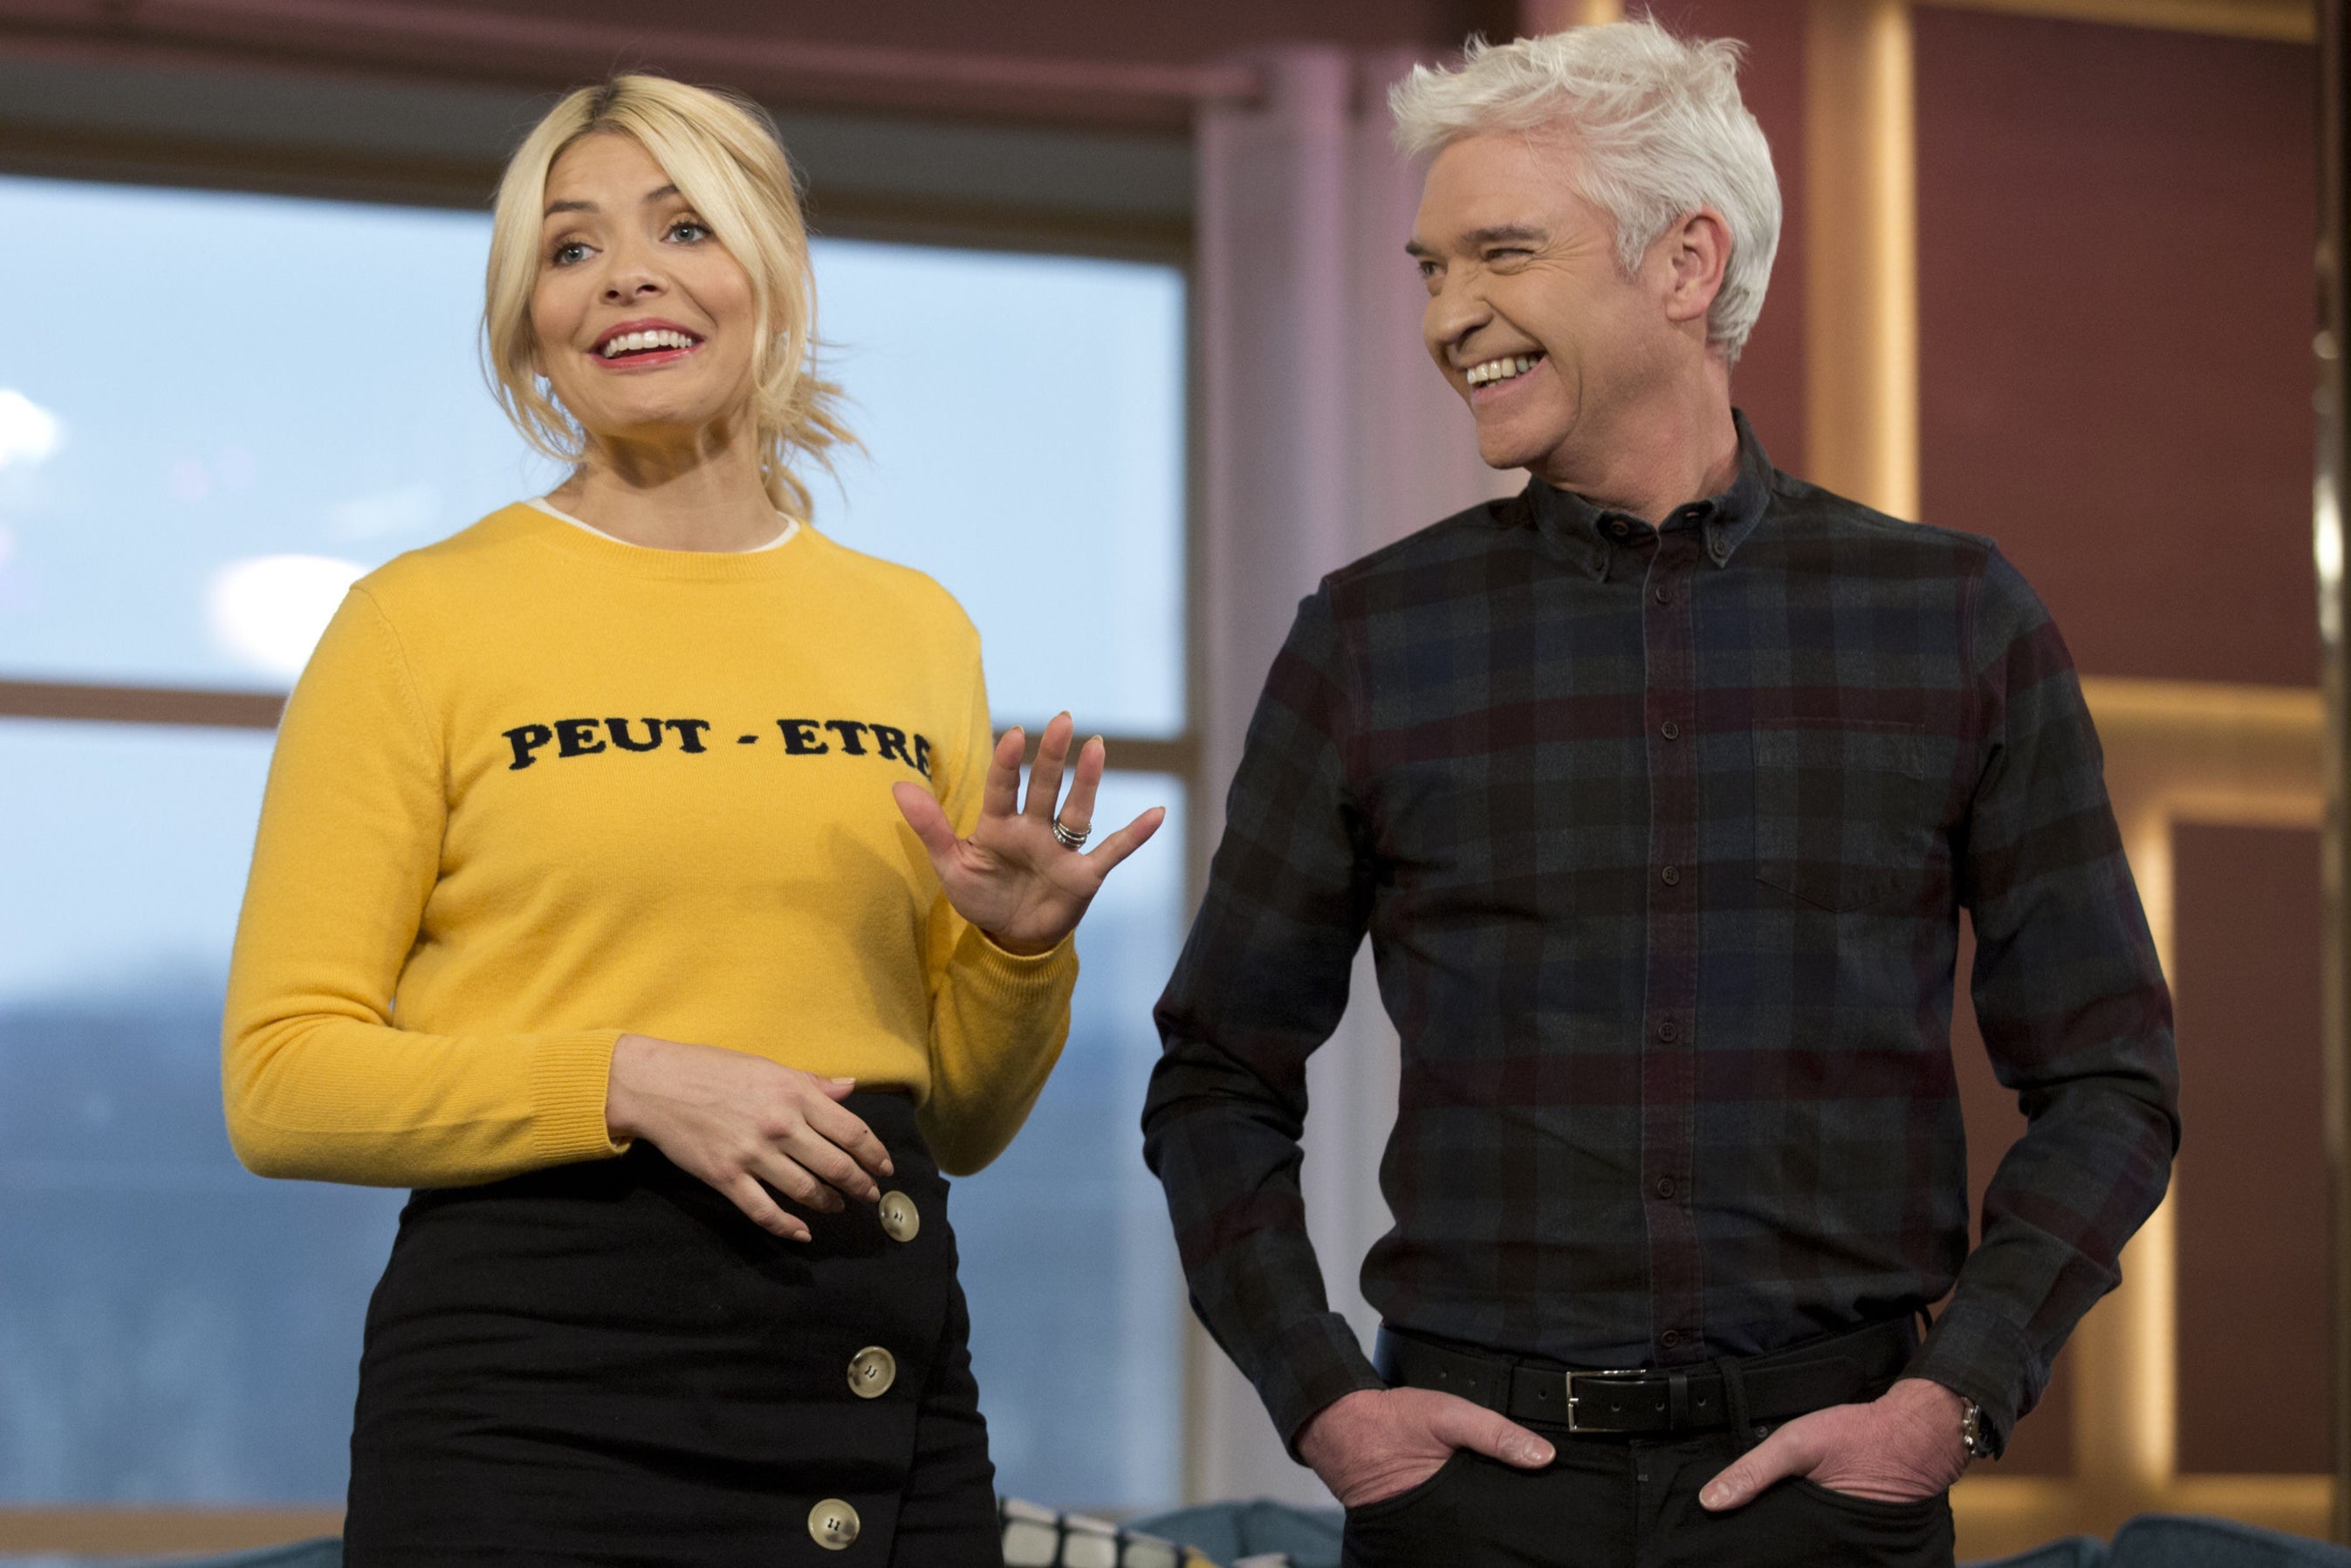 ‘This Morning’ presenters Holly Willoughby and Phillip Schofield during a photocall at the ITV Studios in 2018